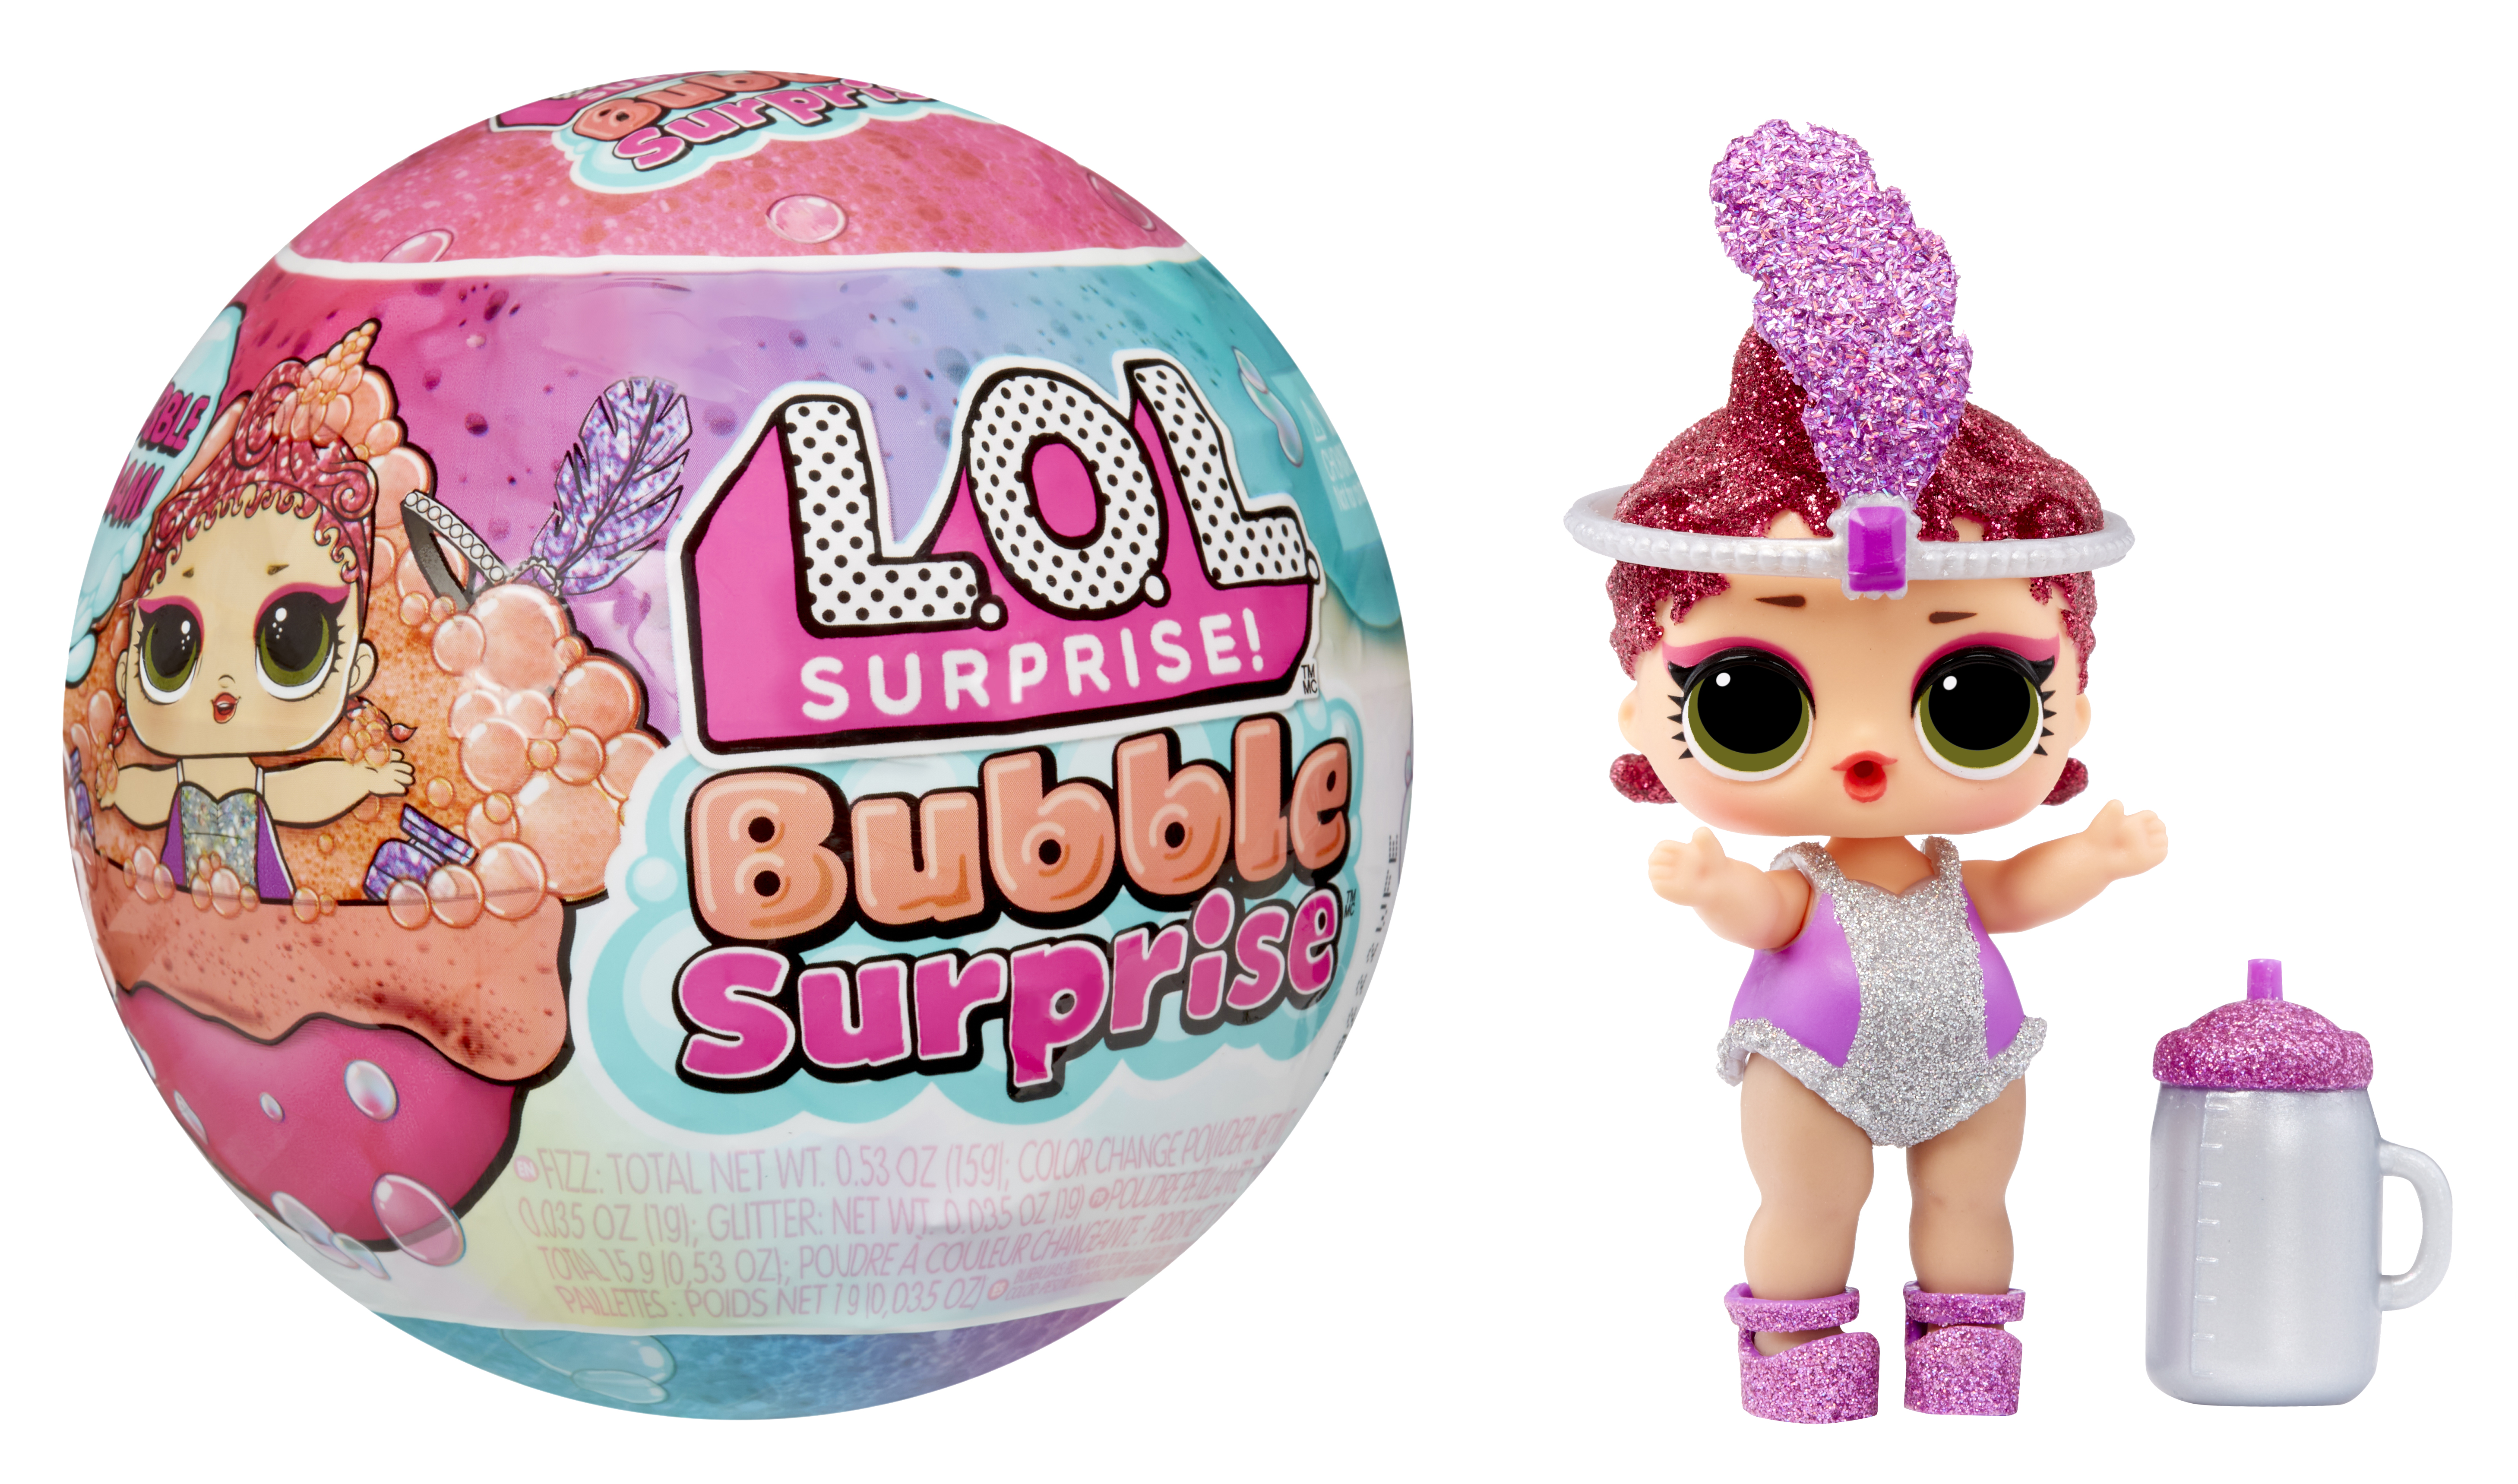 L.O.L. Surprise!™ Bubble Surprise™ Launches in June, Rounding Out Innovative Portfolio of New Toys in First Half of 2023